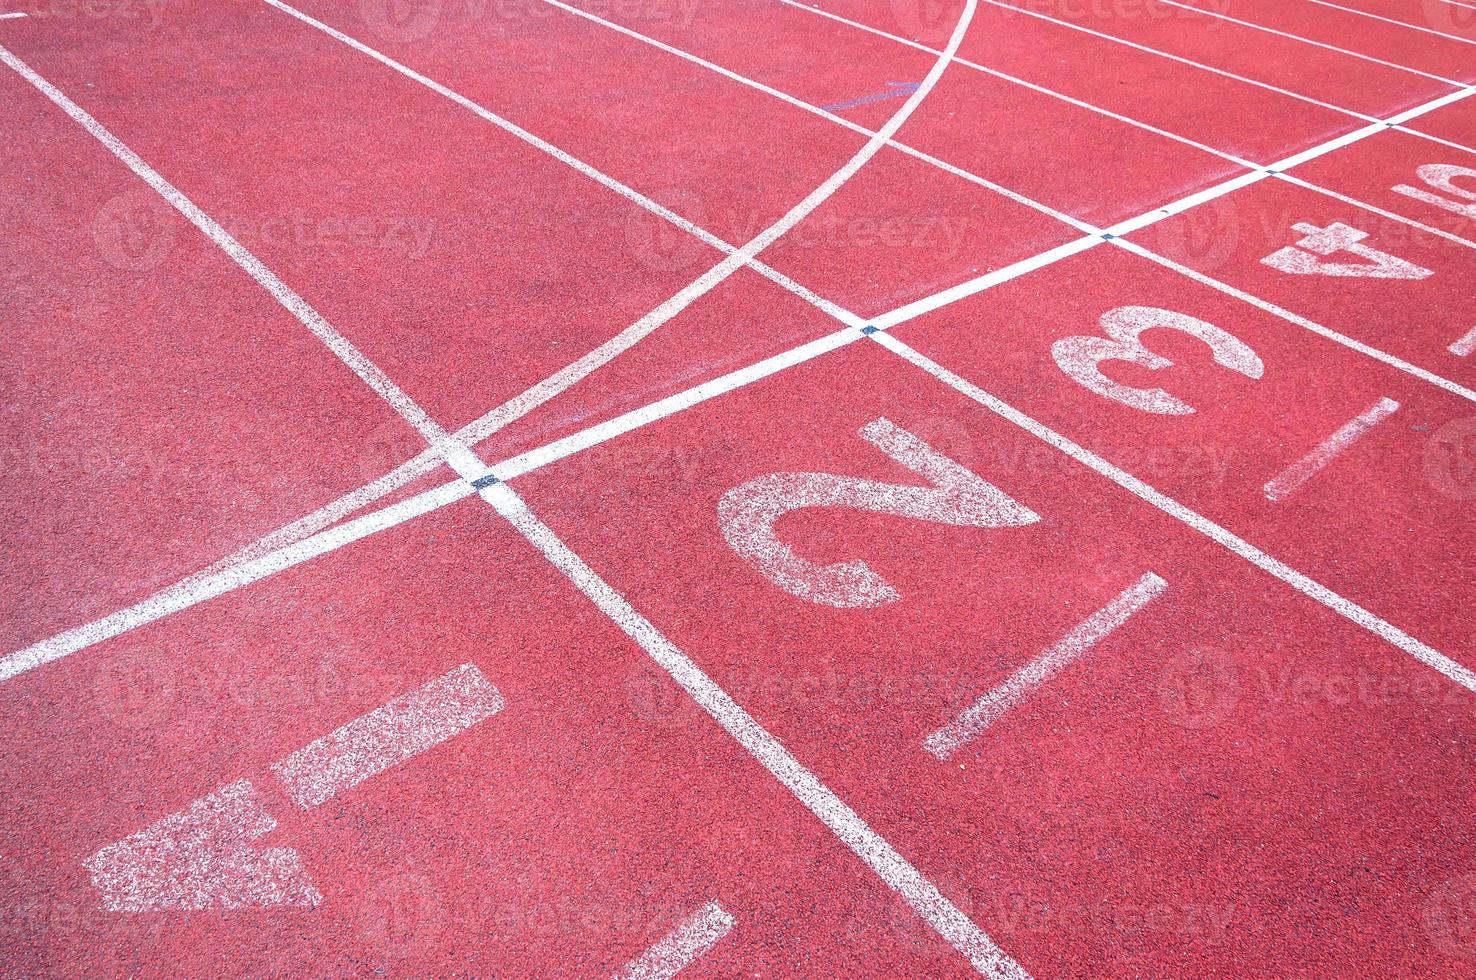 Numbers starting point on red running track,running track and green grass,Direct athletics Running track at Sport Stadium photo